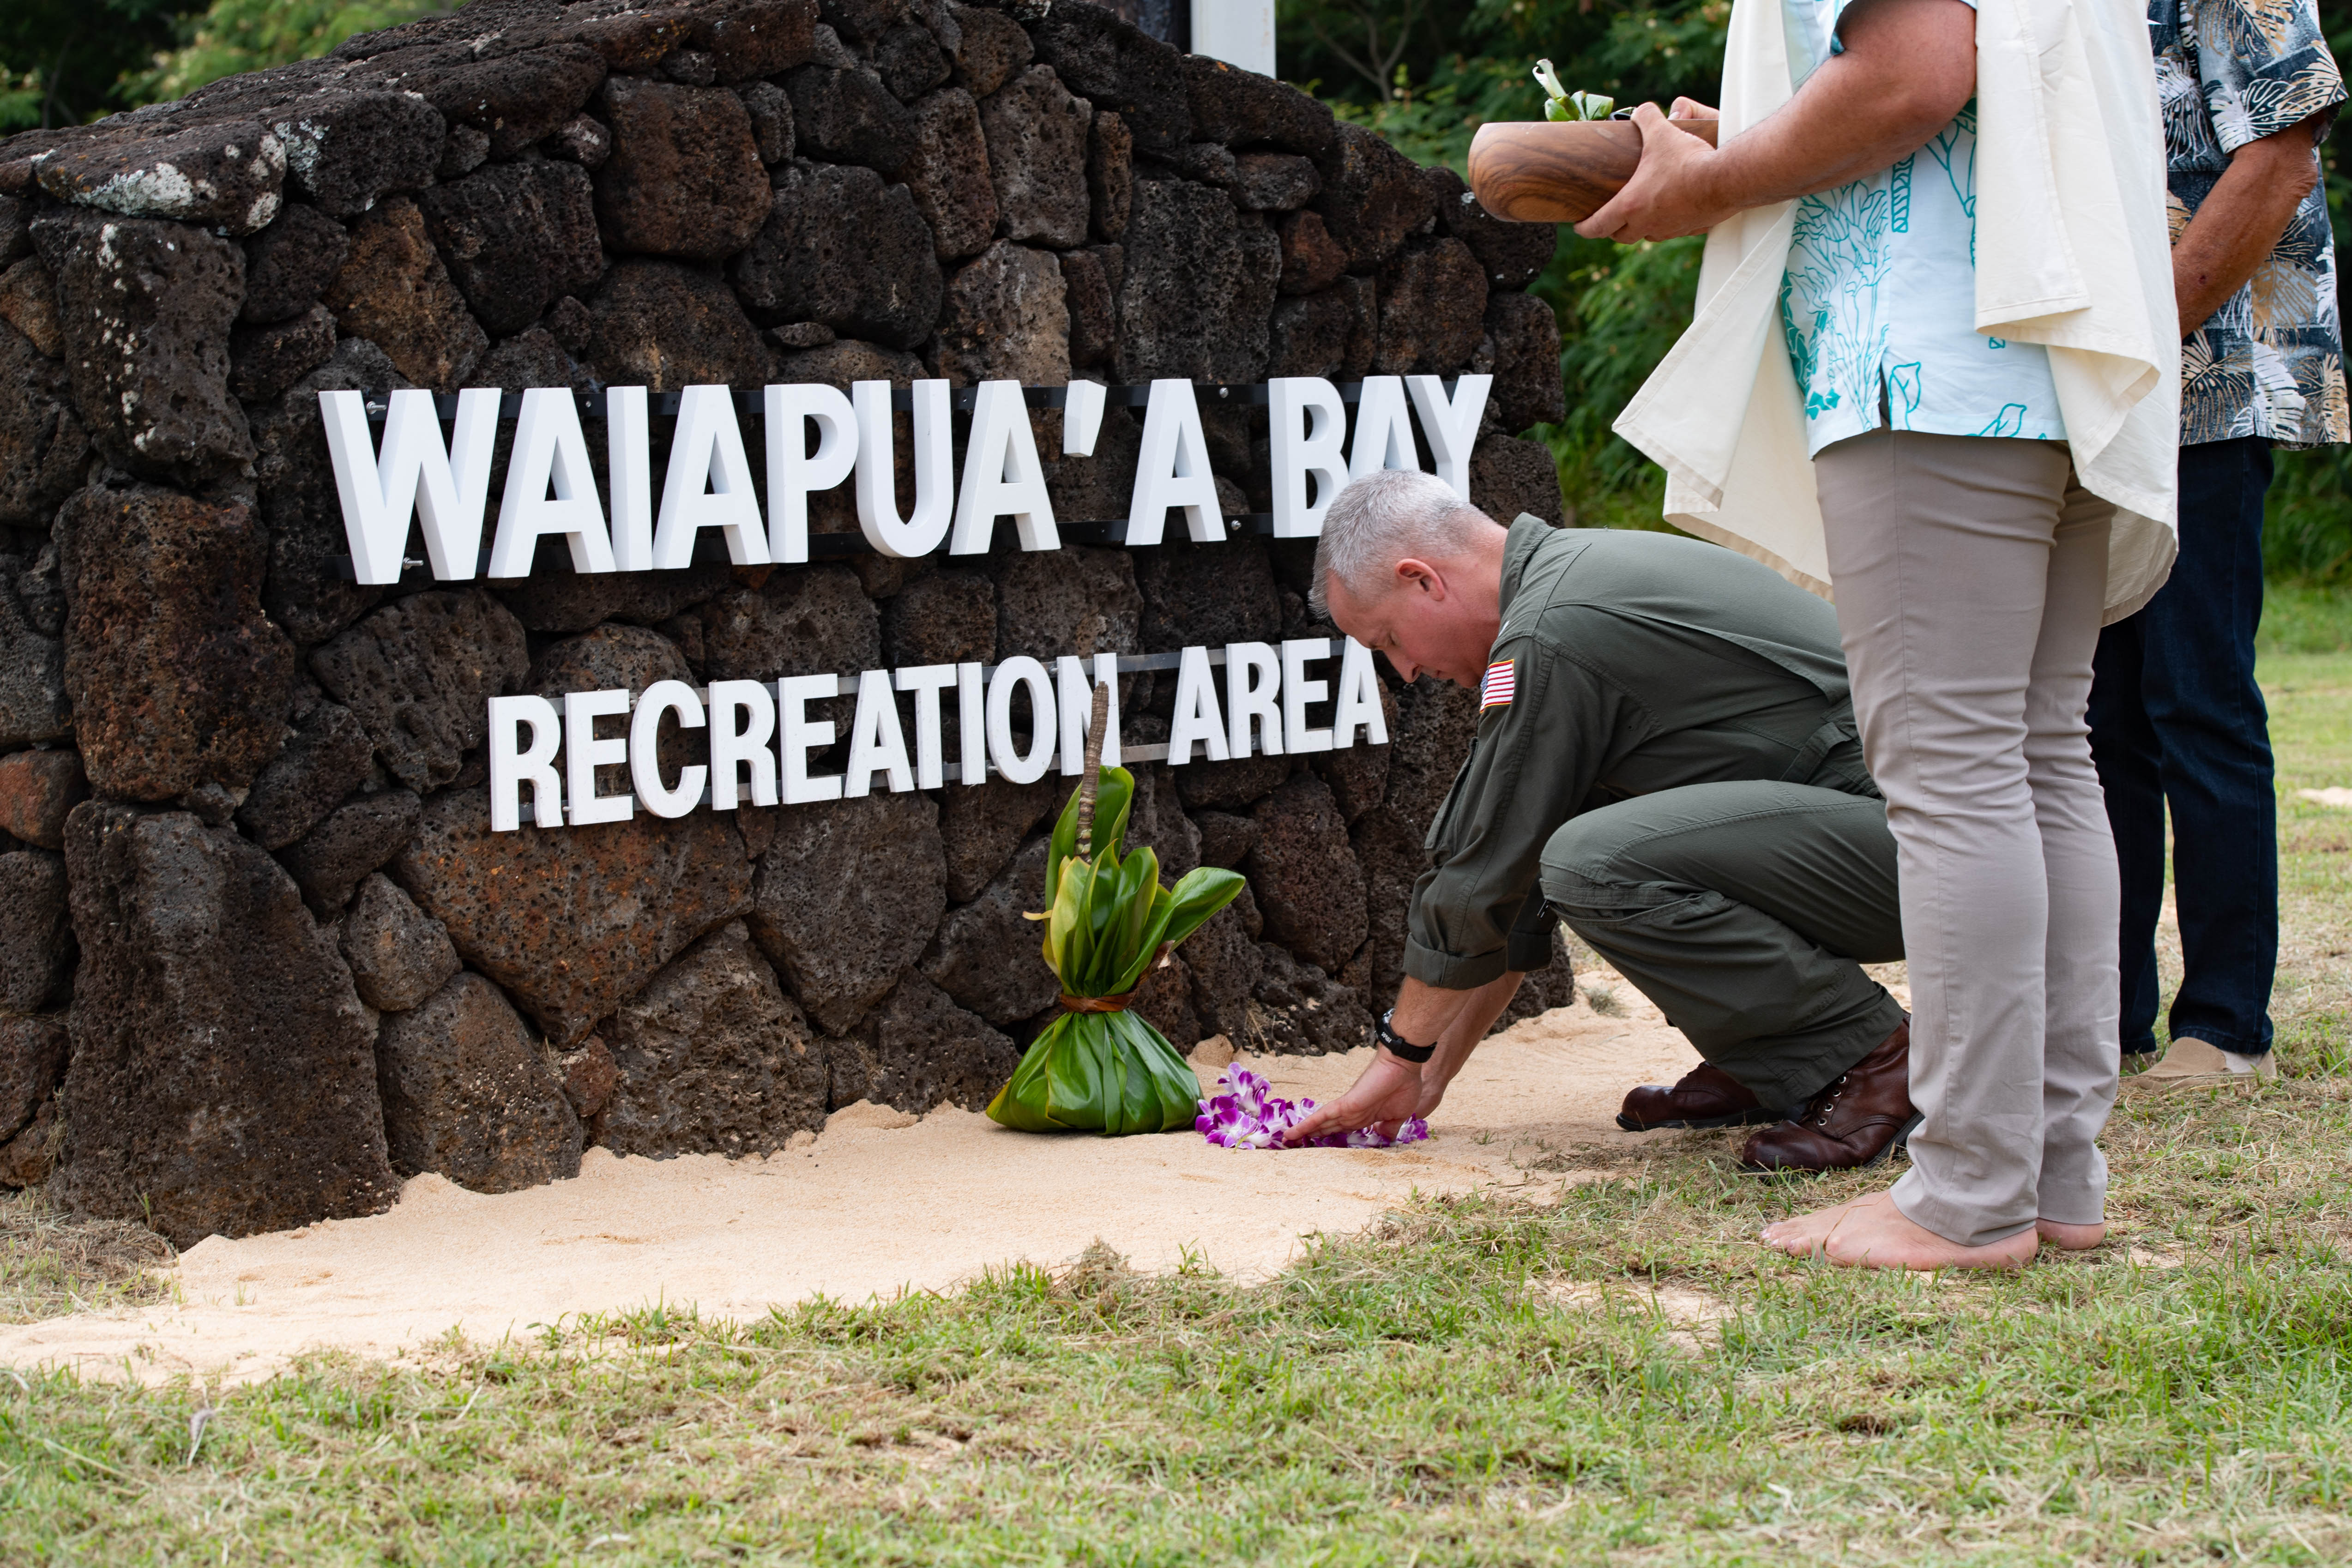 PMRF Returns to the Traditional Place Name of Waiapua'a